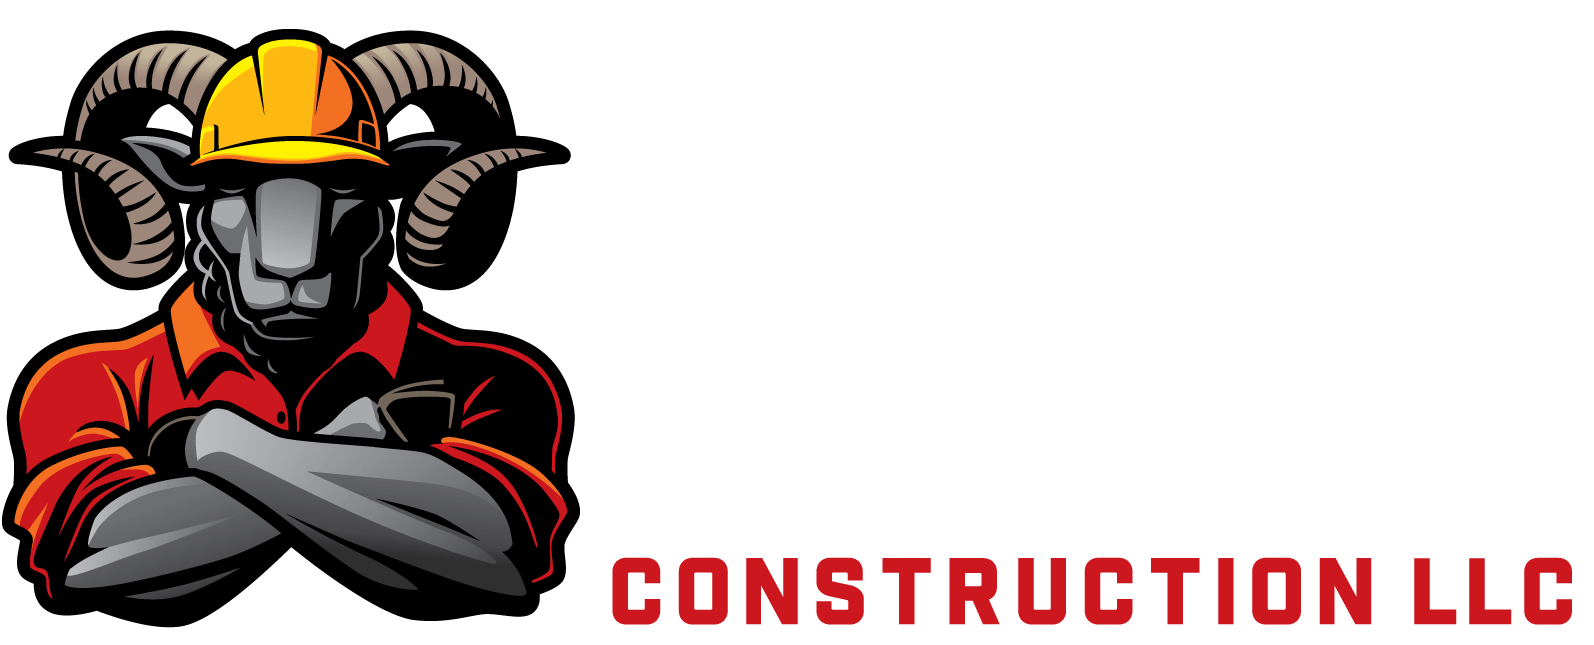 Image related to Black Sheep Construction LLC services